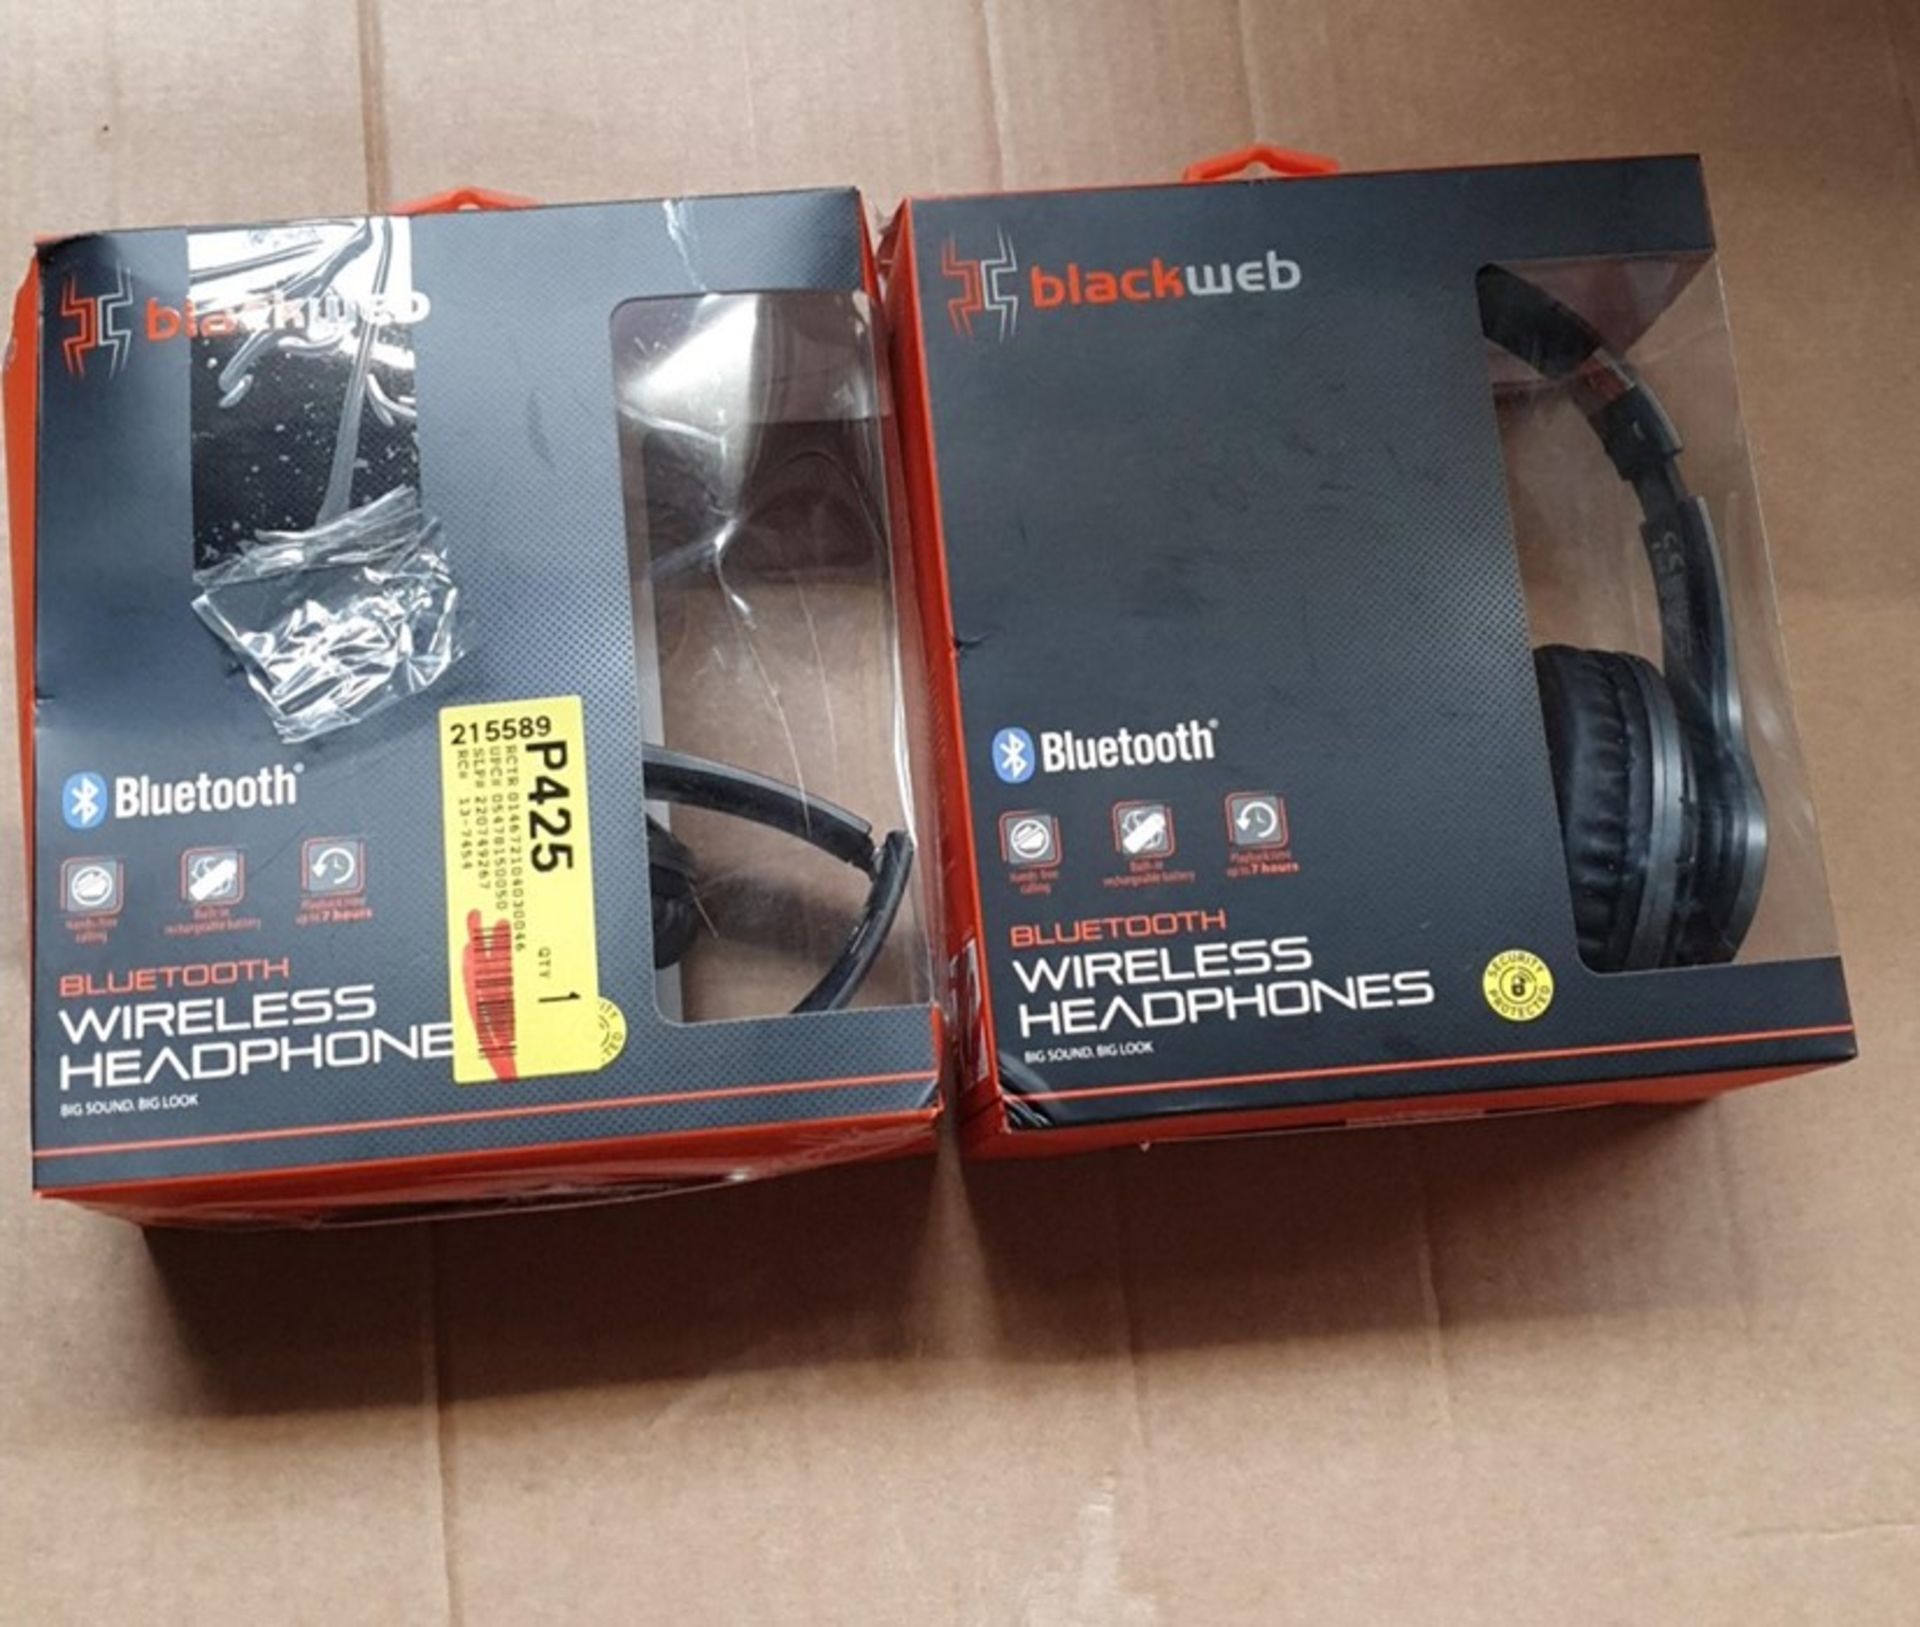 1 LOT TO CONTAIN 2 BLACKWEB BLUETOOTH WIRELESS HEADPHONES IN GREY - BL 5589 / RRP £50.00 (VIEWING